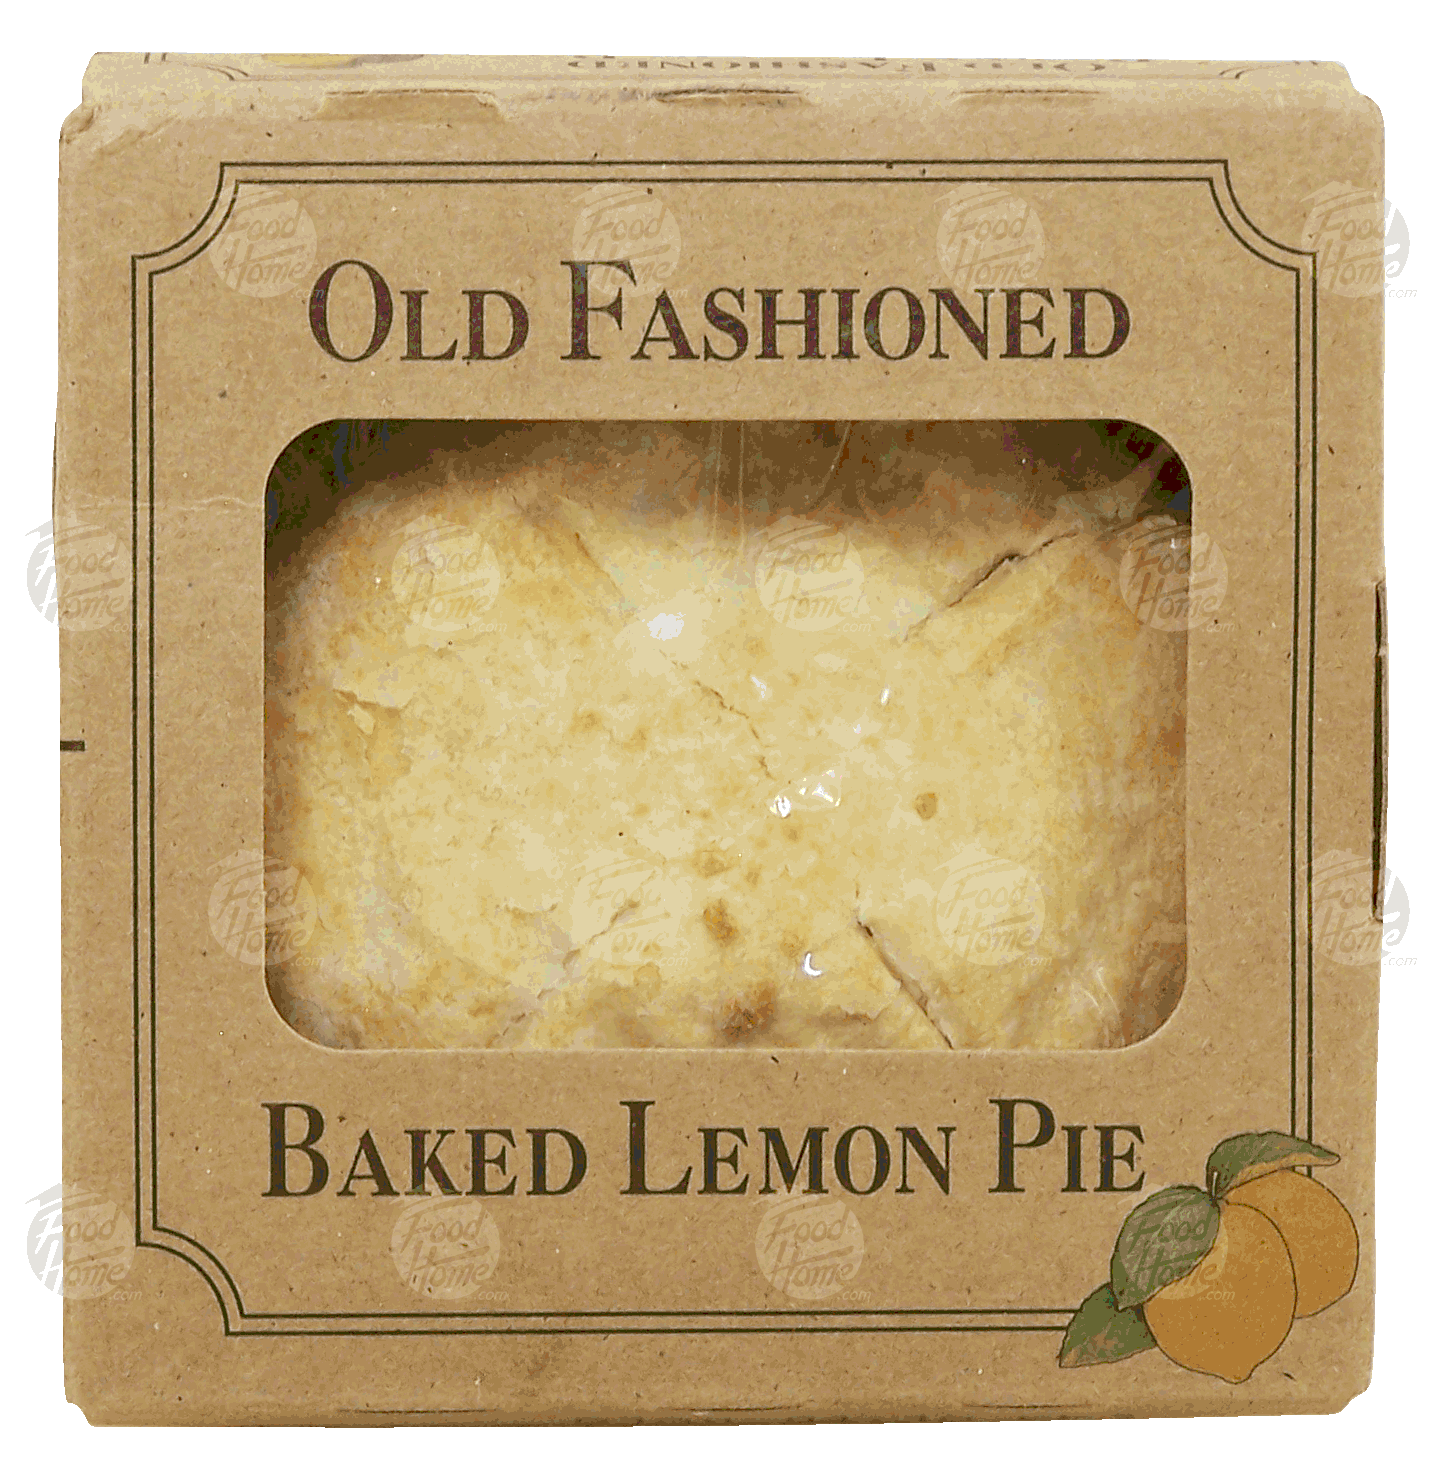 Table Talk Pies Old Fashioned baked lemon pie, single serving Full-Size Picture